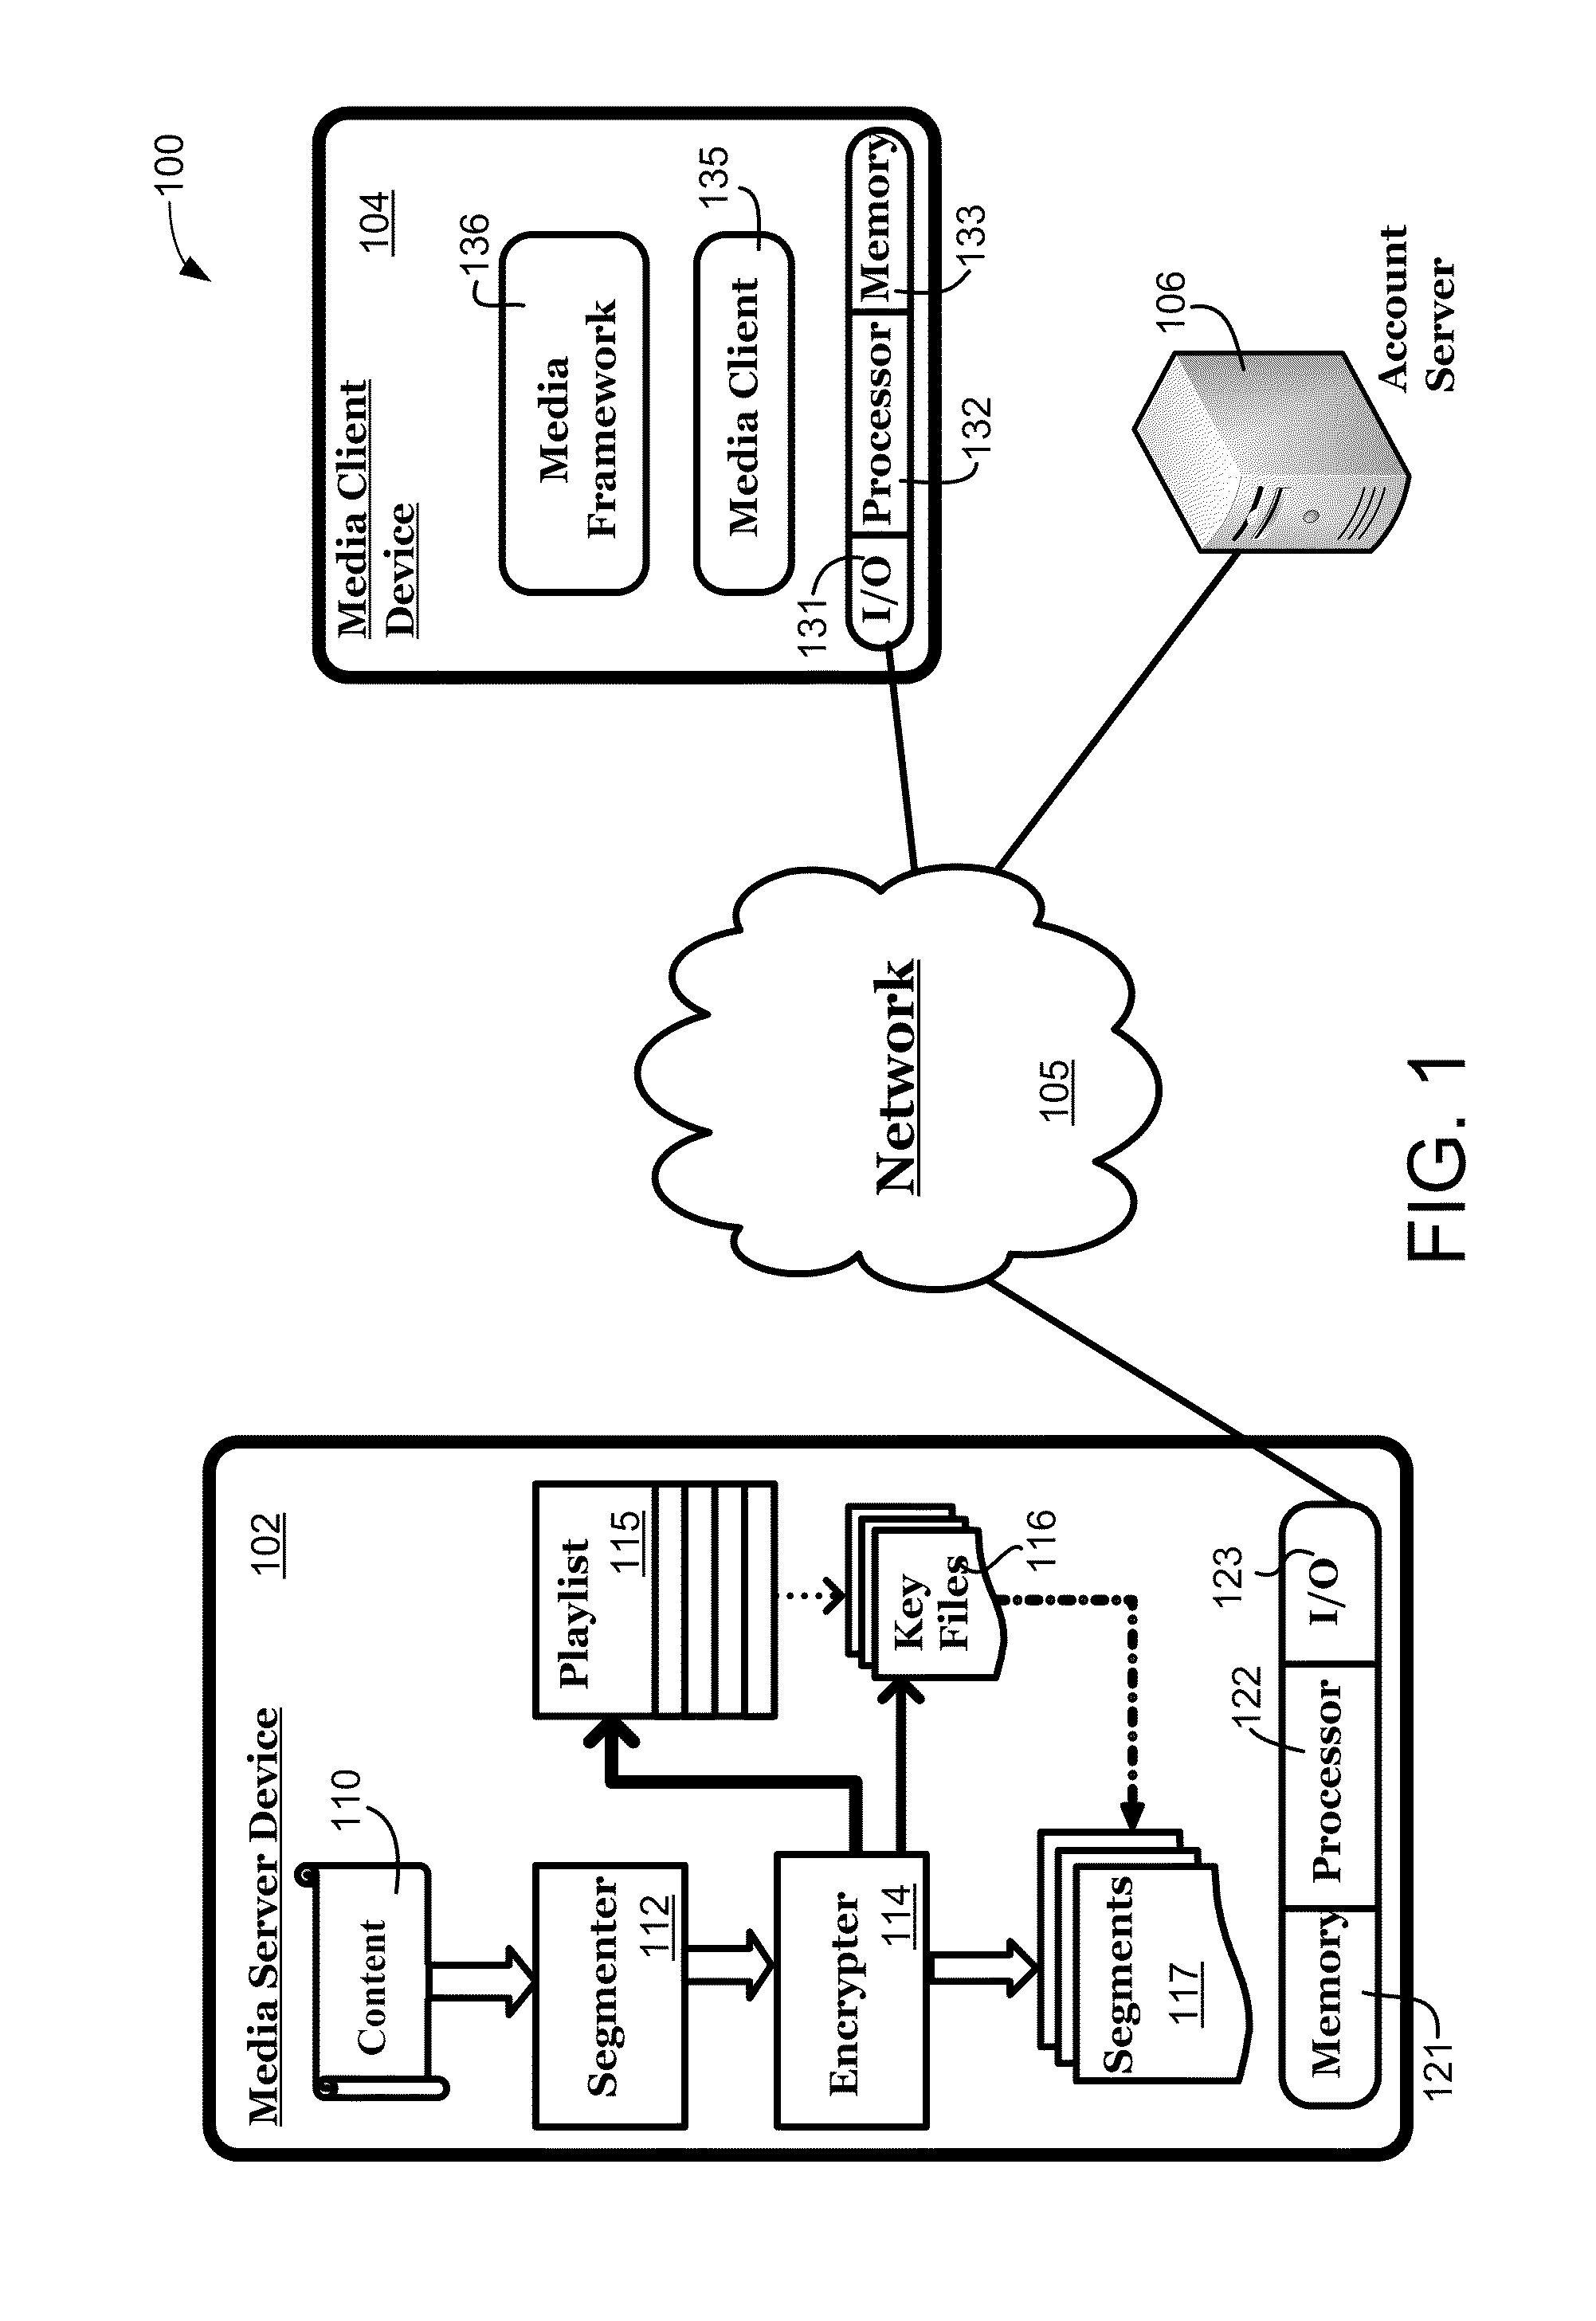 Systems and methods for securely streaming media content